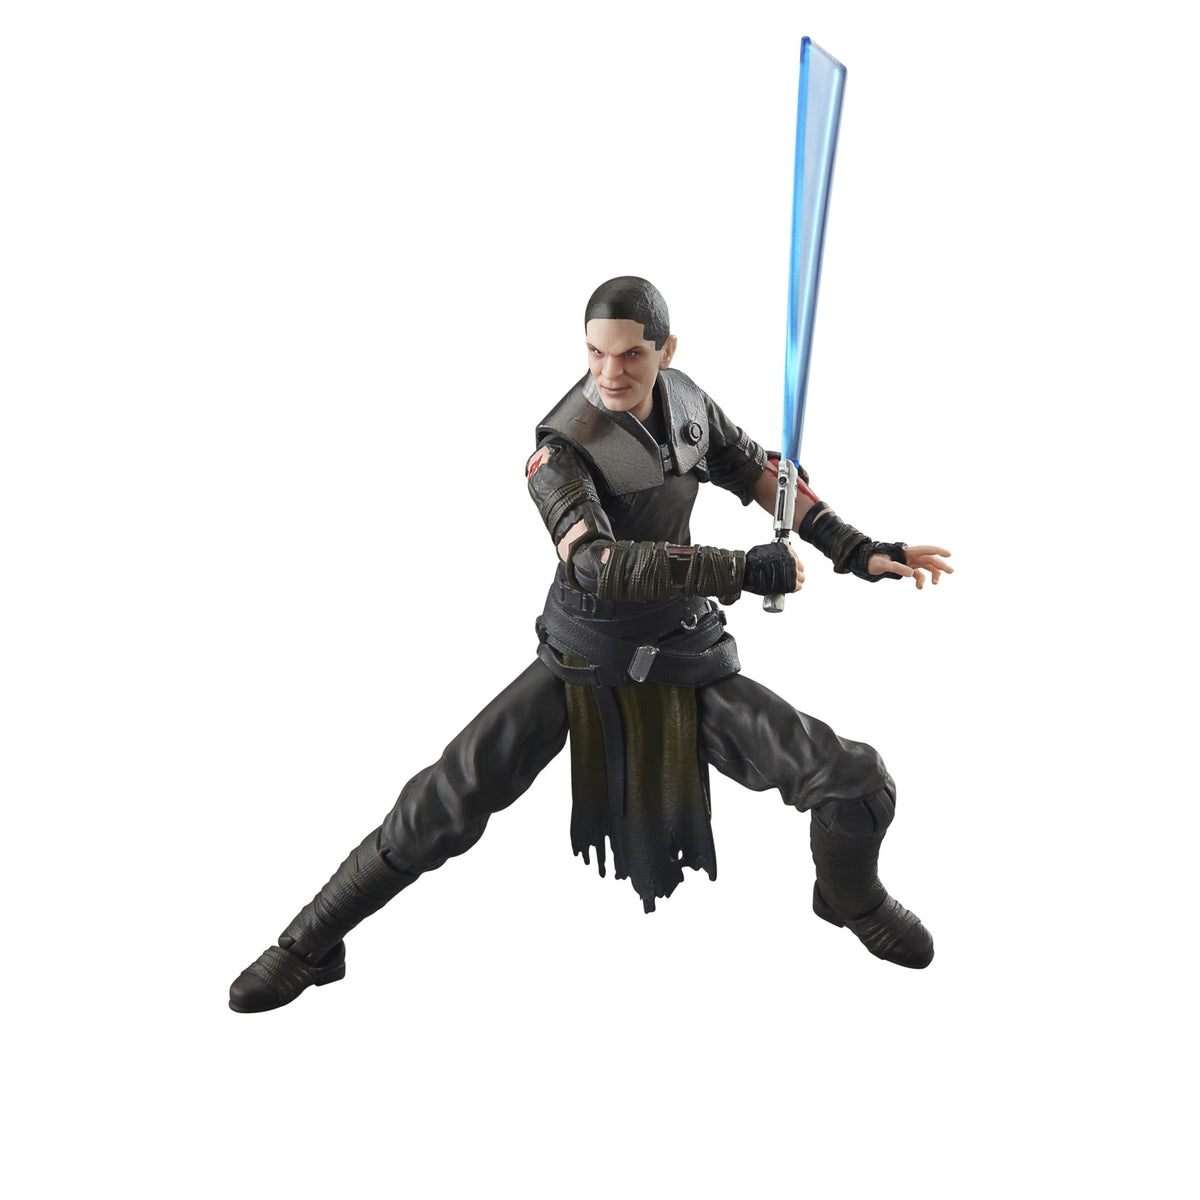 Press Release – 2023 Pulse Con Exclusive TBS 6-Inch Starkiller & Troopers  The Force Unleashed Set – Star Wars Collector